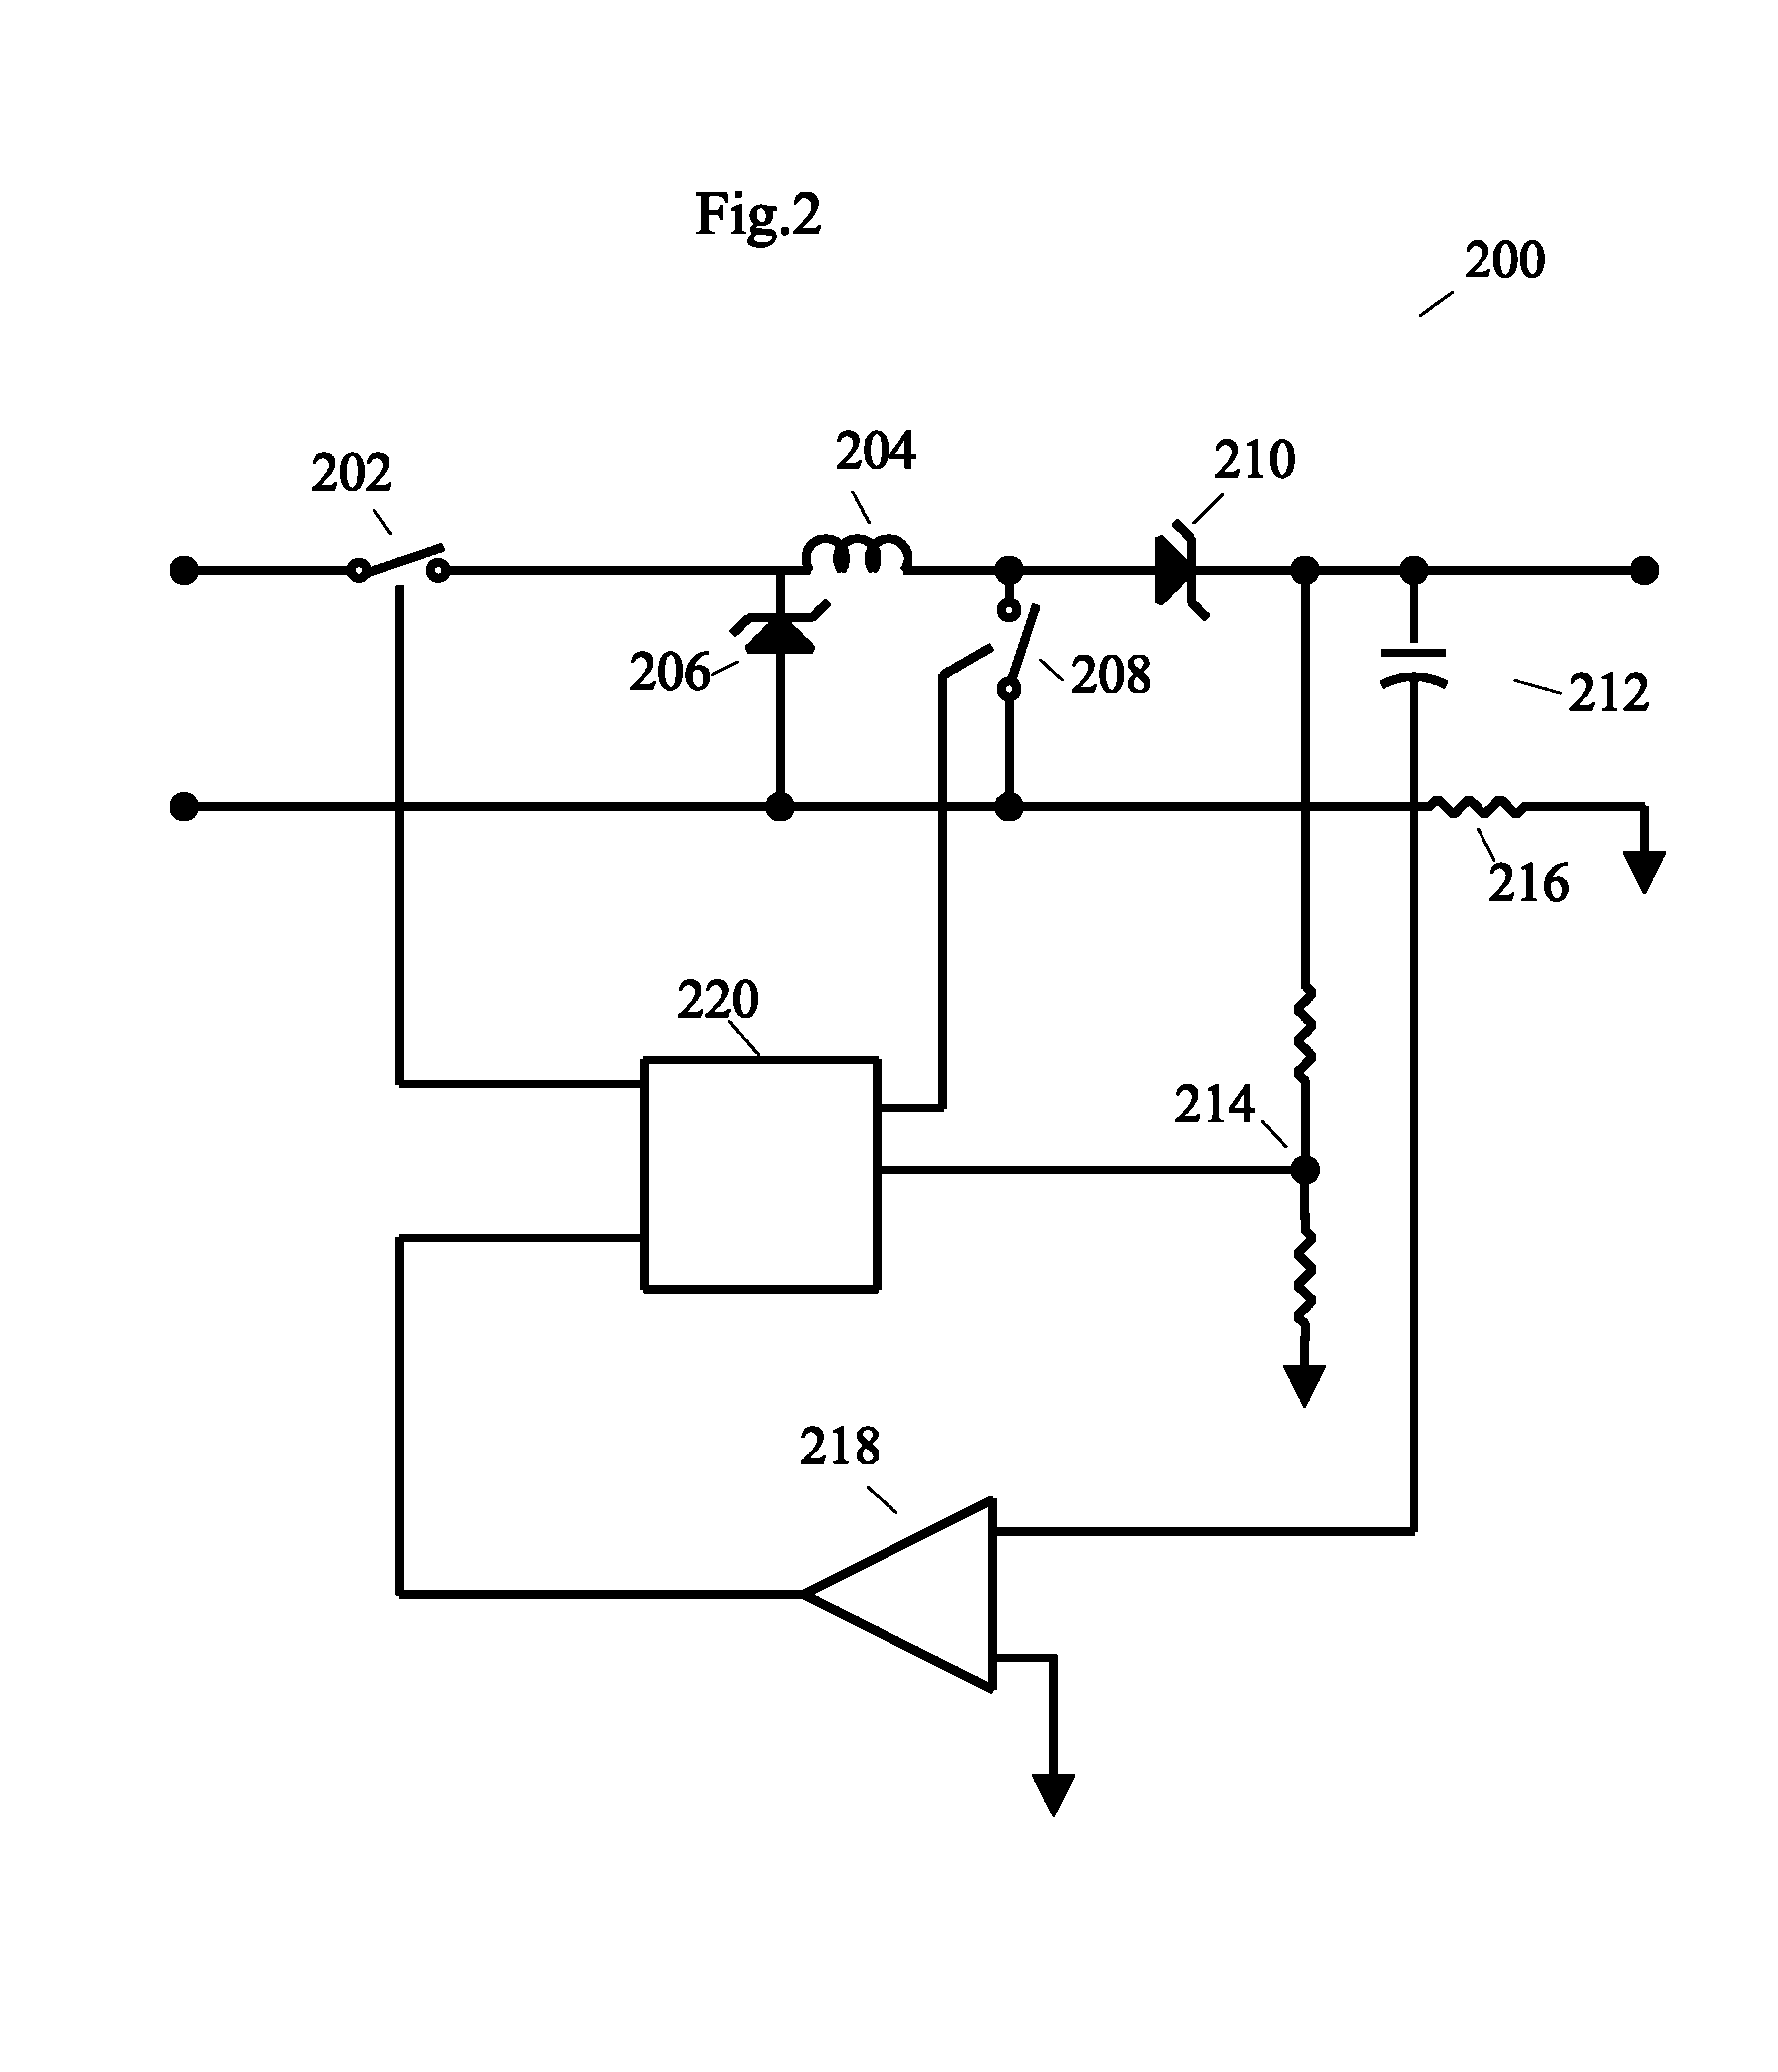 Voltage adapter for a battery-powered camera system